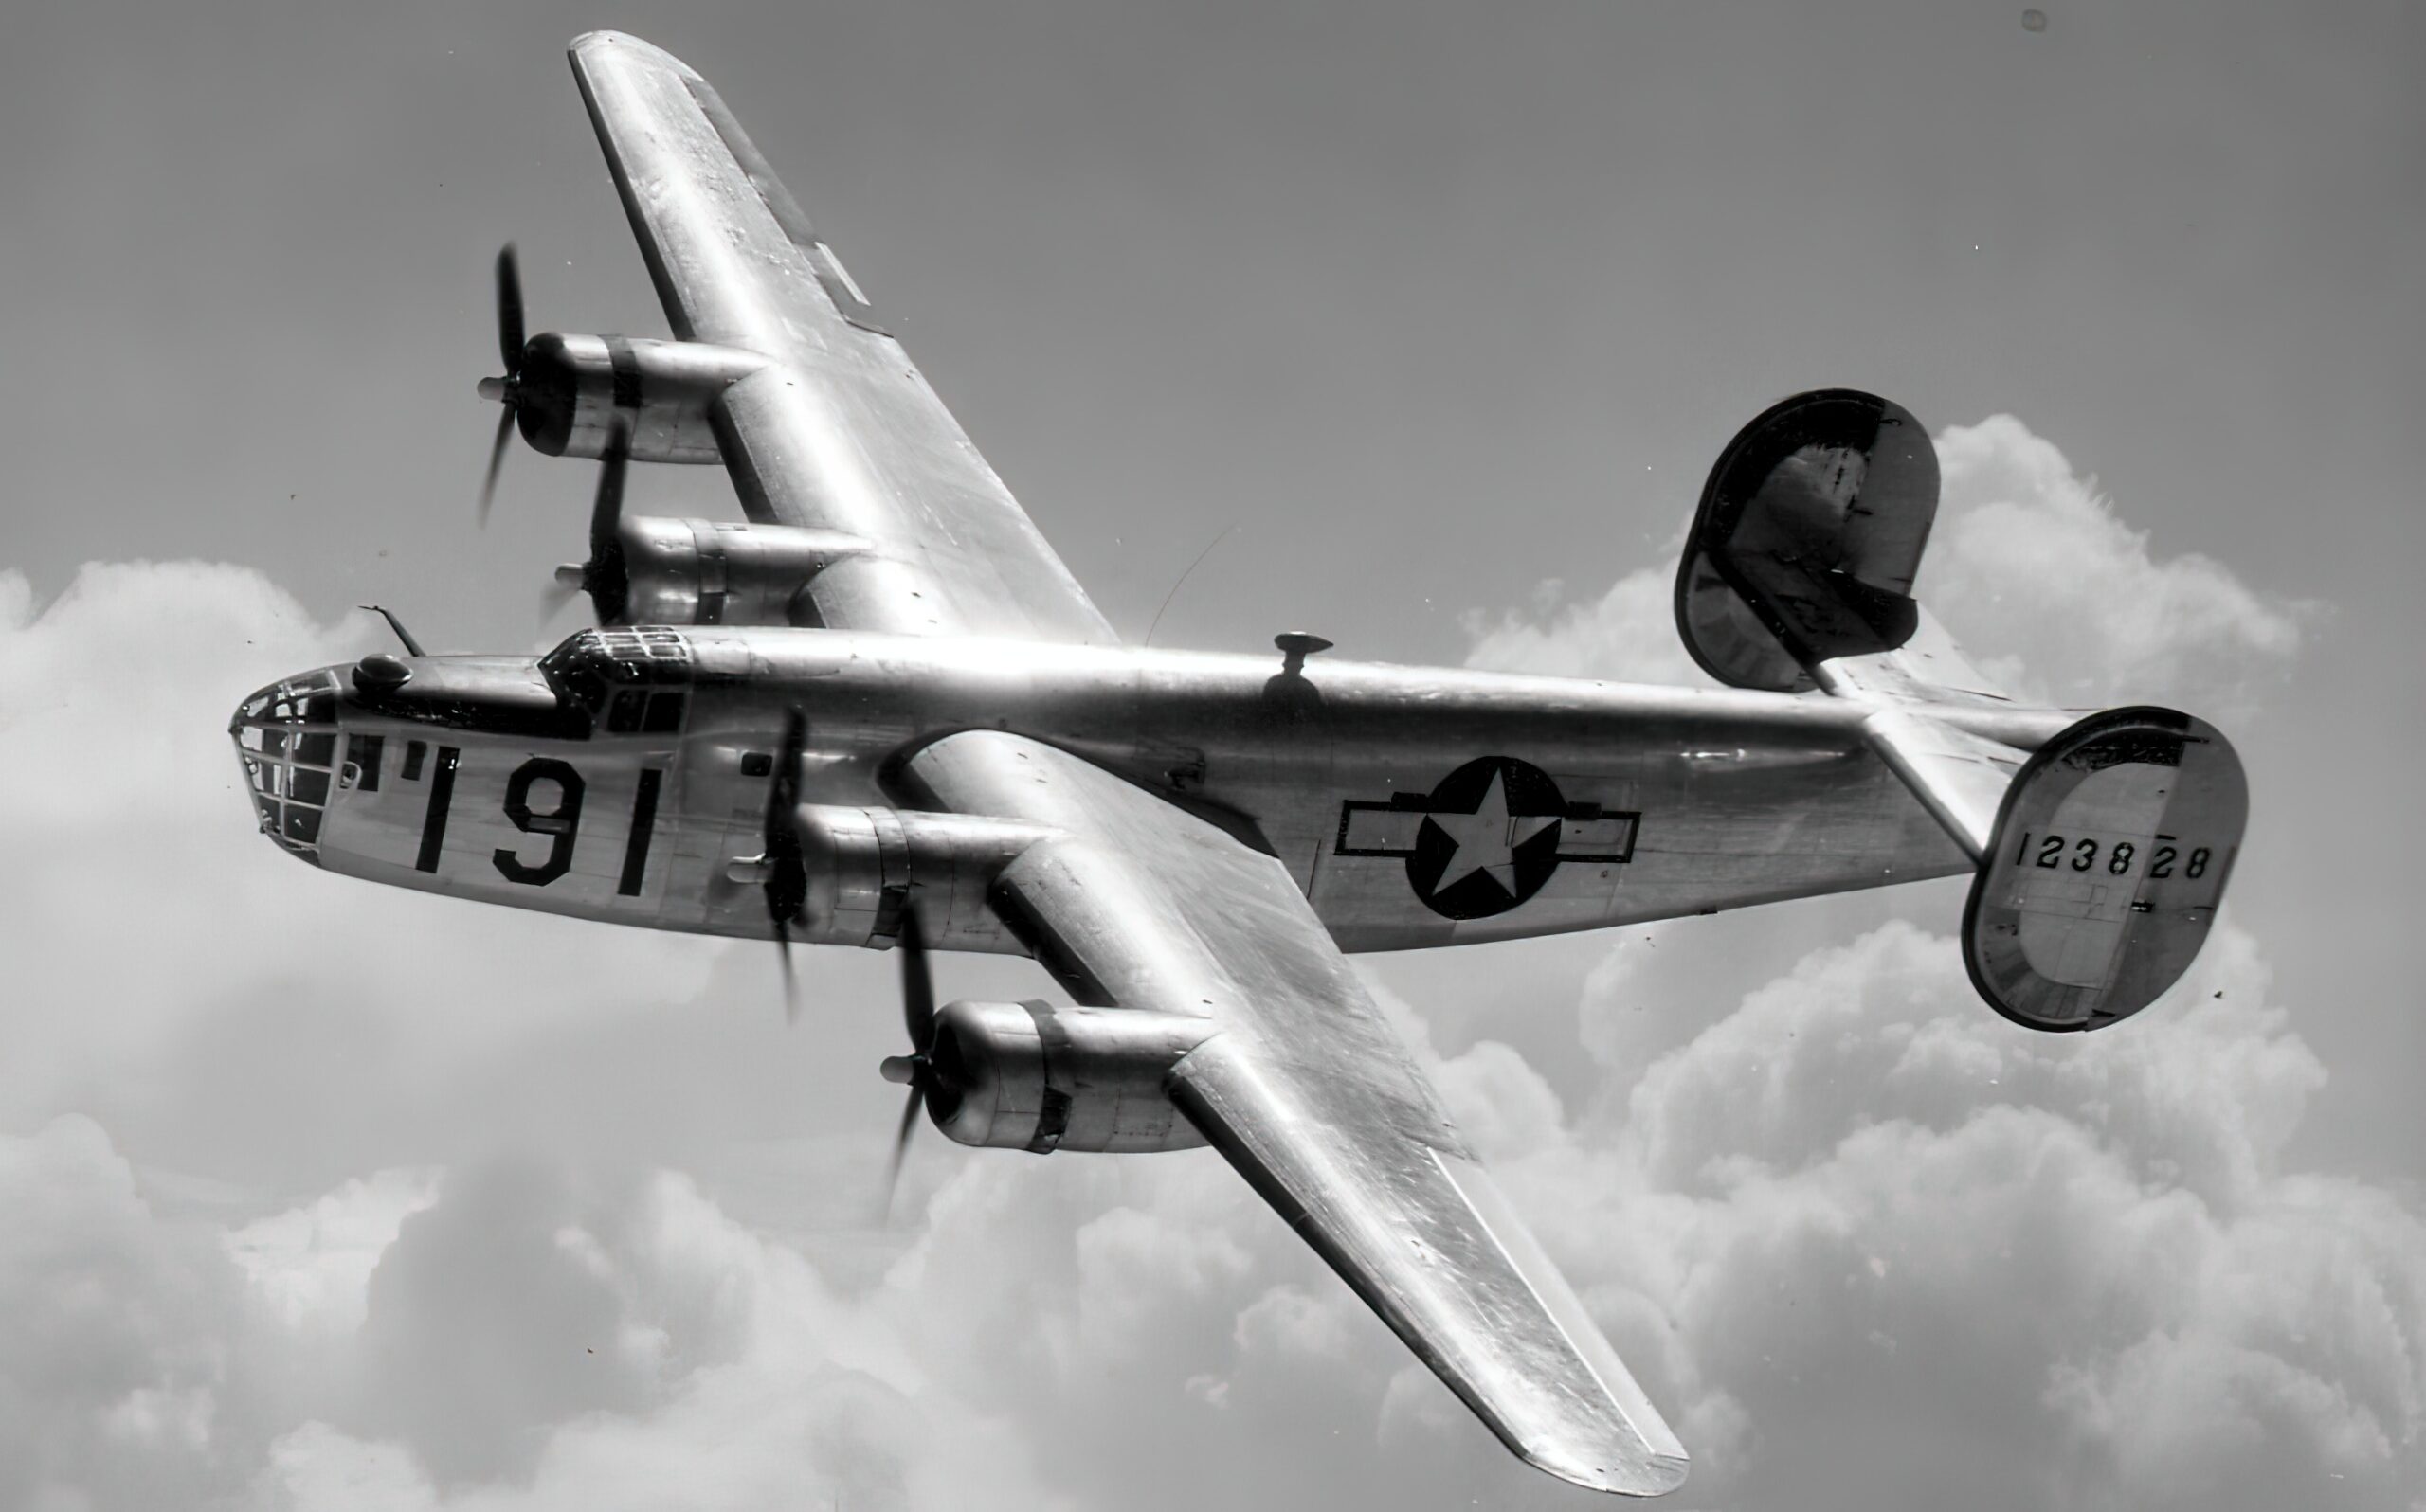 A Consolidated B-24 Liberator from Maxwell Field, Alabama, four engine pilot school, glistens in the sun as it makes a turn at high altitude in the clouds